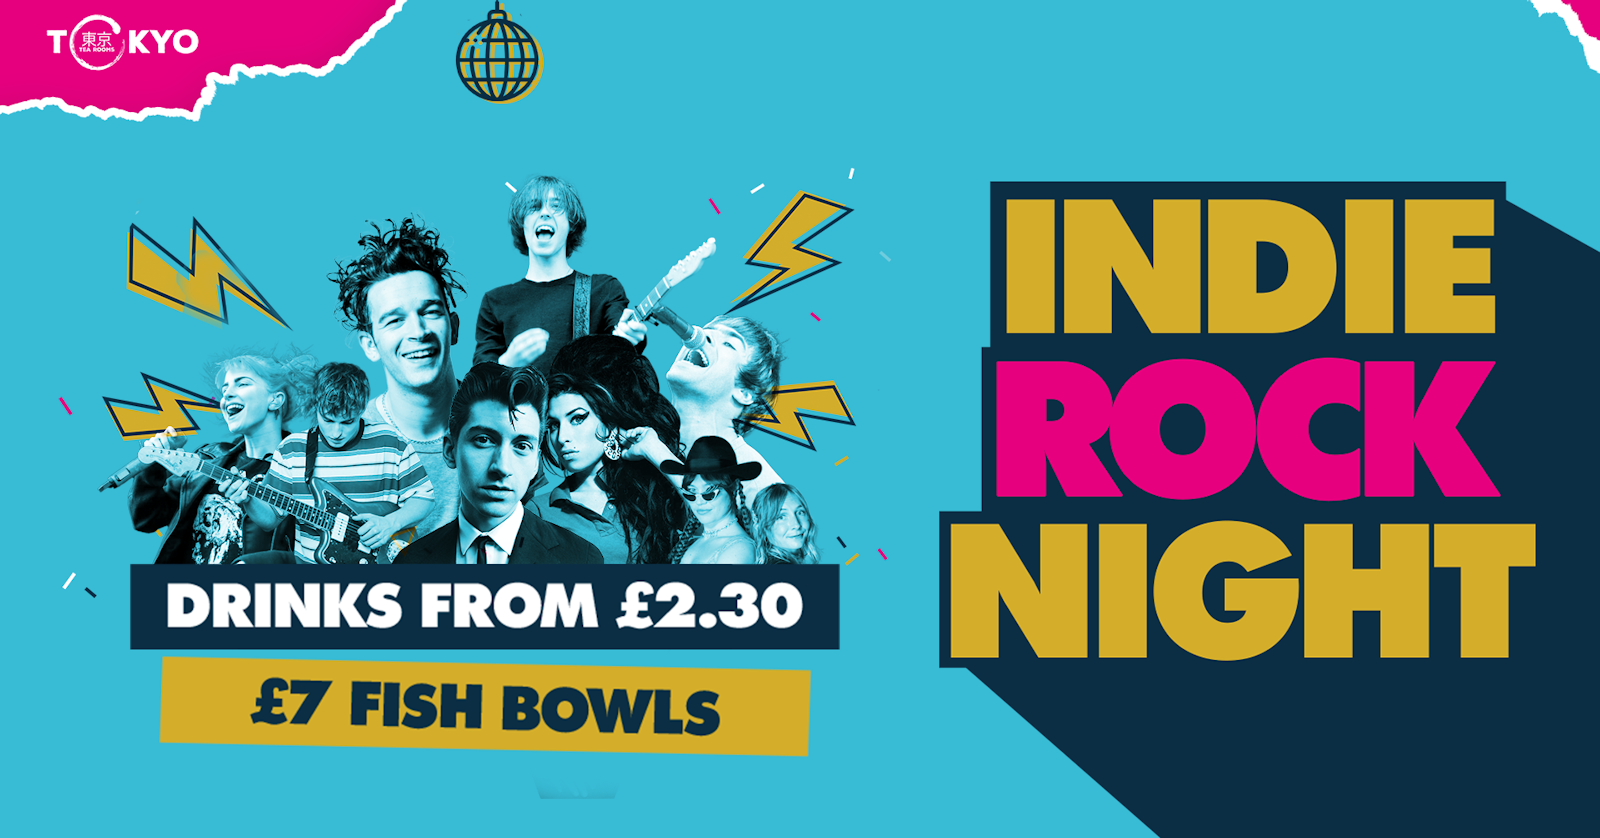 Indie Rock Night *ONLY 3 £3 TICKETS LEFT*